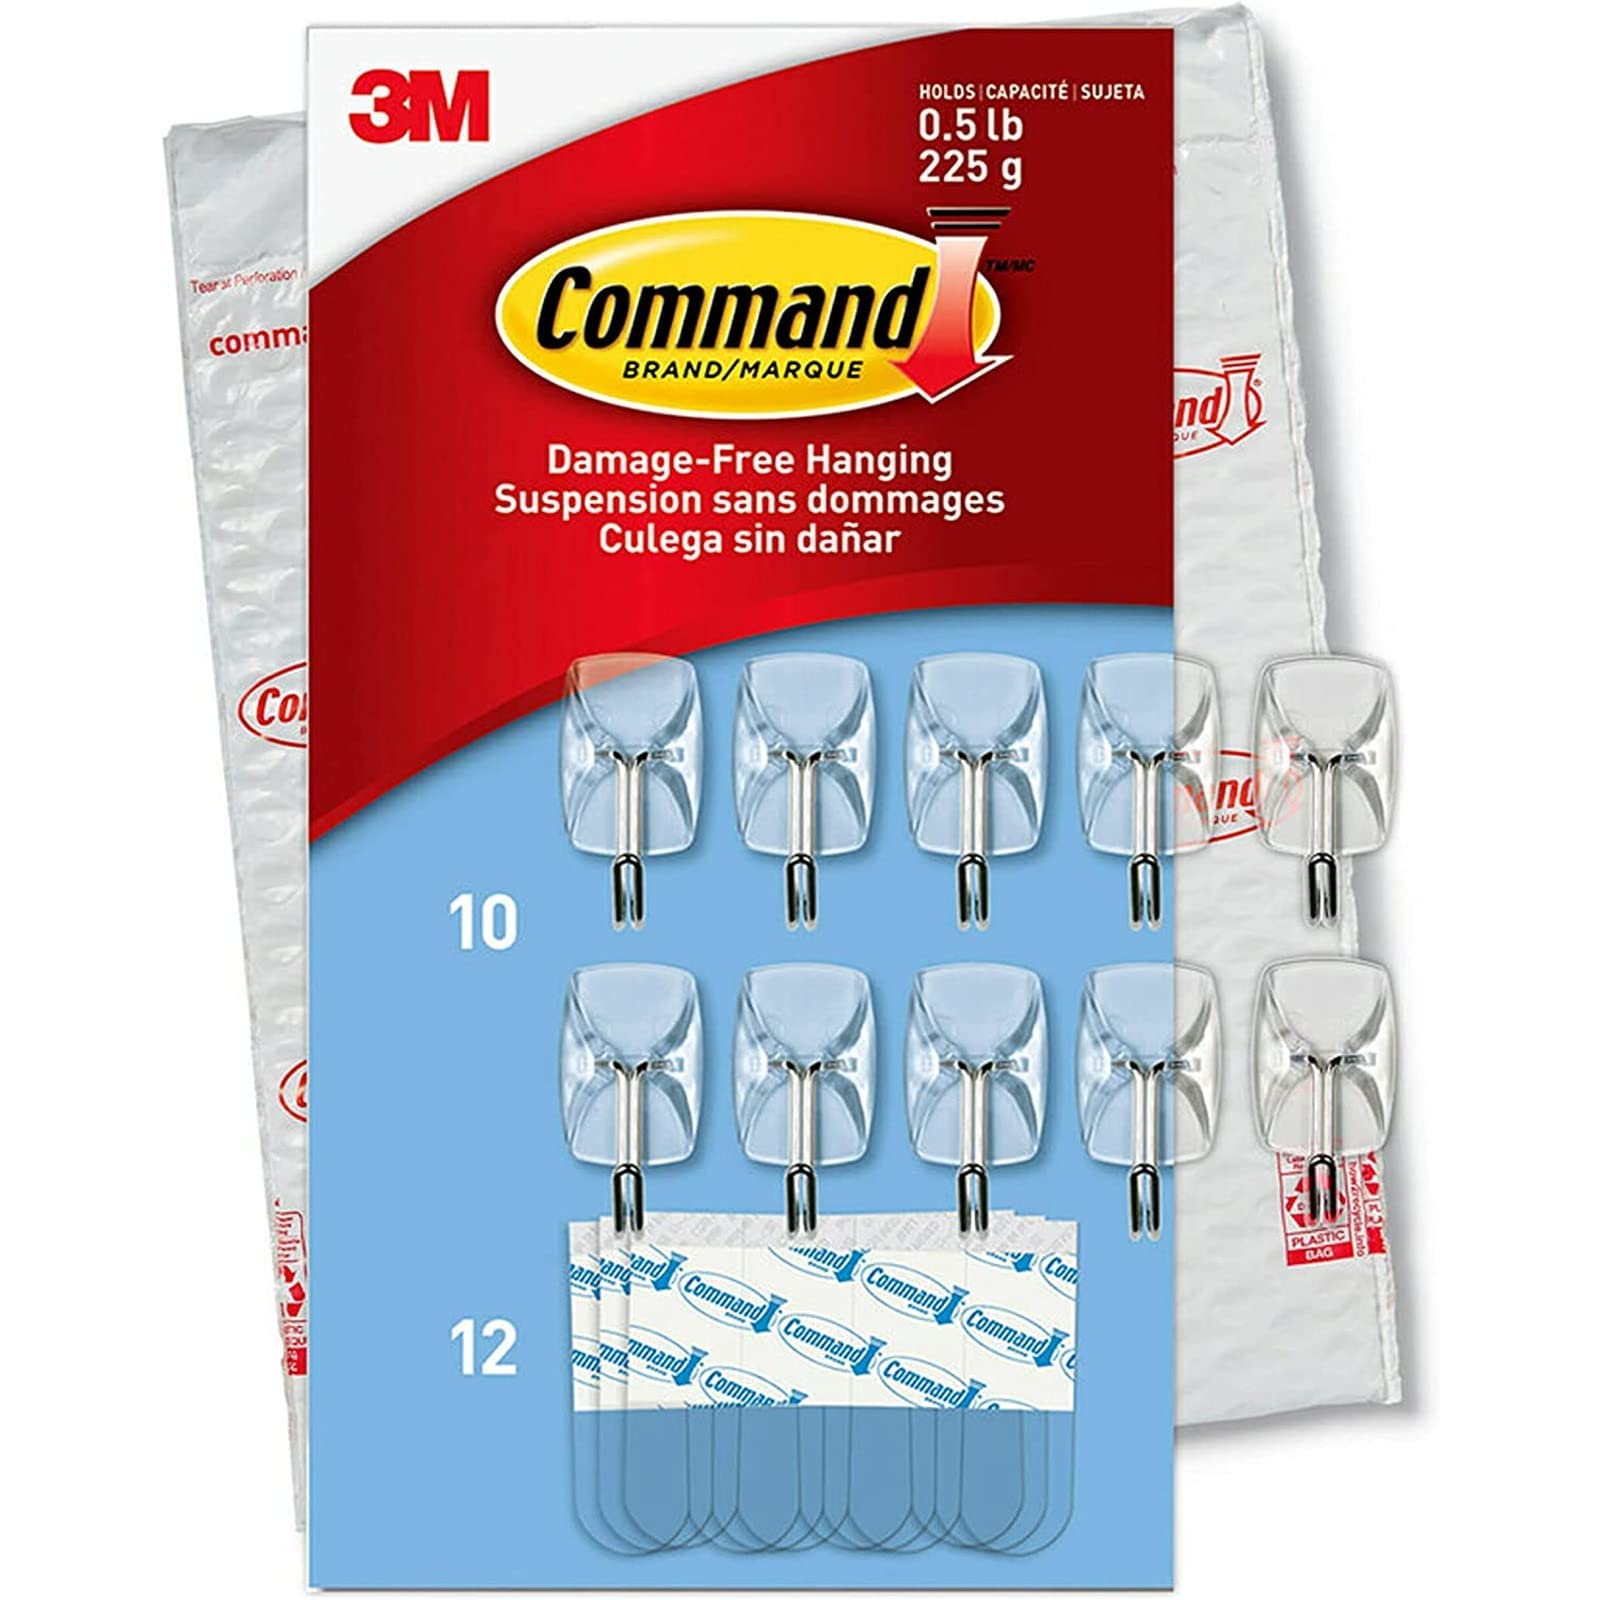 Command Small Wire Toggle Hooks, Damage Free Hanging Wall Hooks with Adhesive Strips, Wall Hooks for Hanging Back to School Dorm Organizers, 10 Clear Hooks and 12 Command Strips